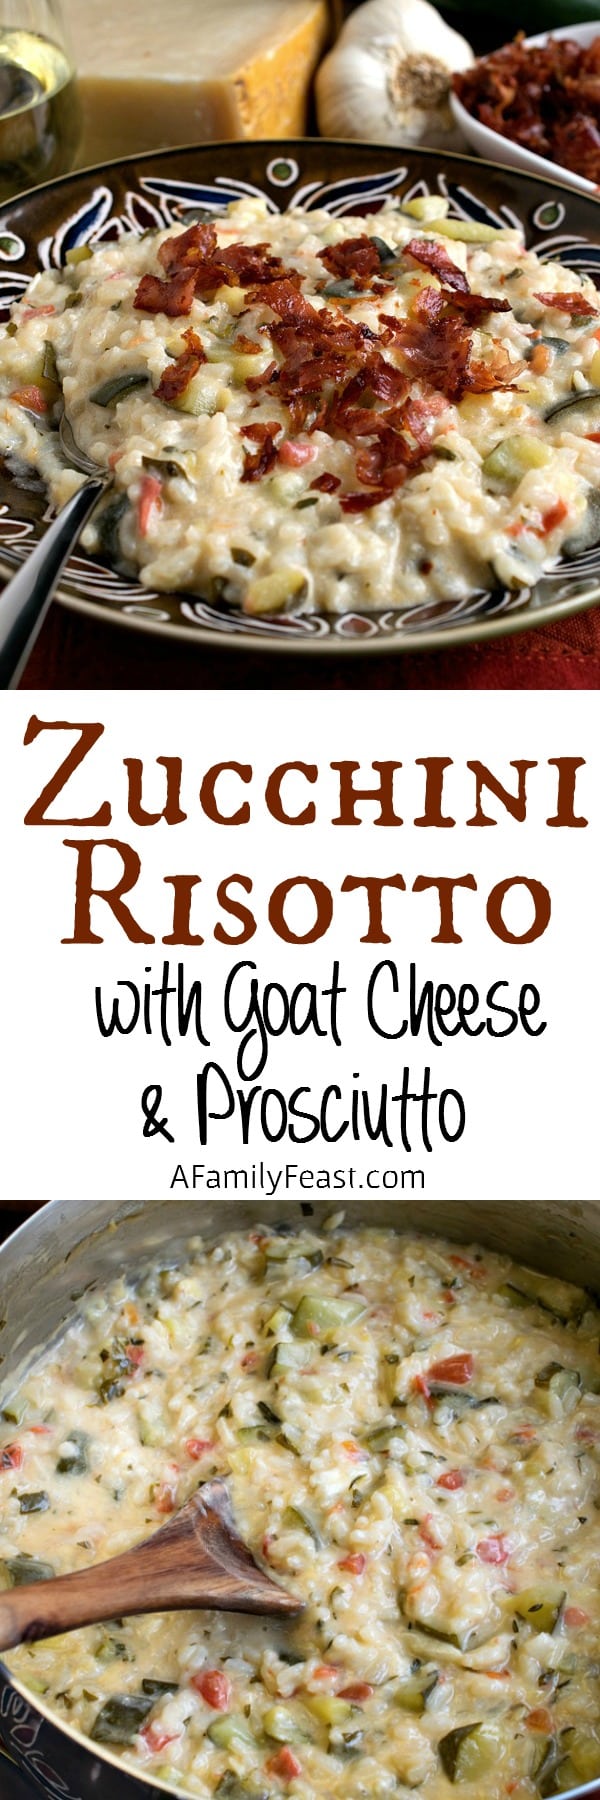 Zucchini Risotto with Goat Cheese and Prosciutto - A fantastic risotto that gets an extra kick of flavor from melted goat cheese stirred in at the end. Plus crispy prosciutto on top!